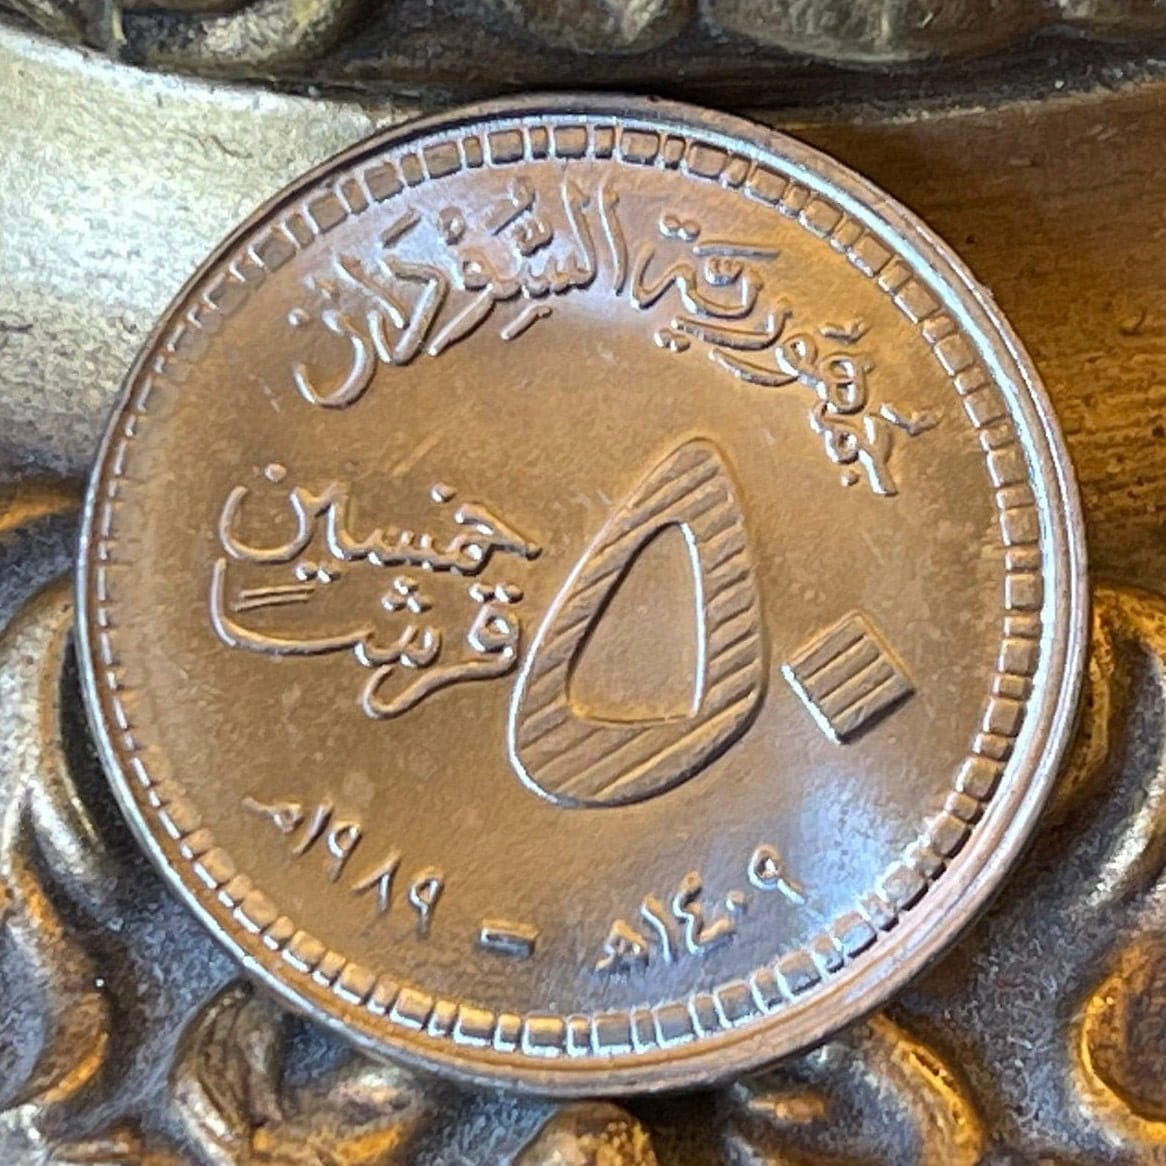 Bank of Sudan 50 Qirsh Sudan Authentic Coin Money for Jewelry and Craft Making (Islamic Banking)